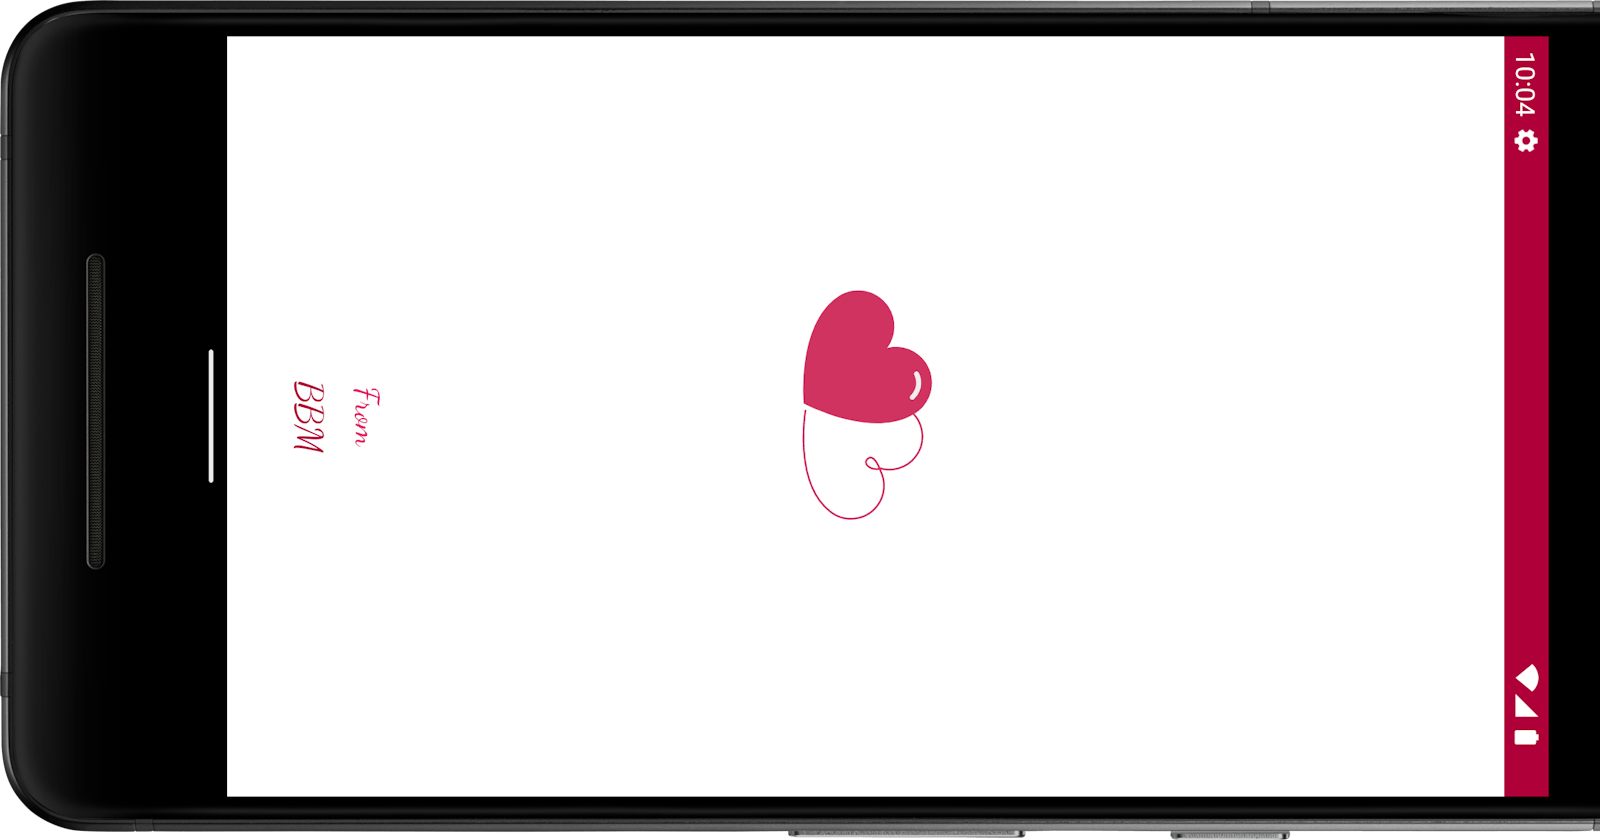 Creating a Splash Screen with Lottie Animation in Android using Kotlin